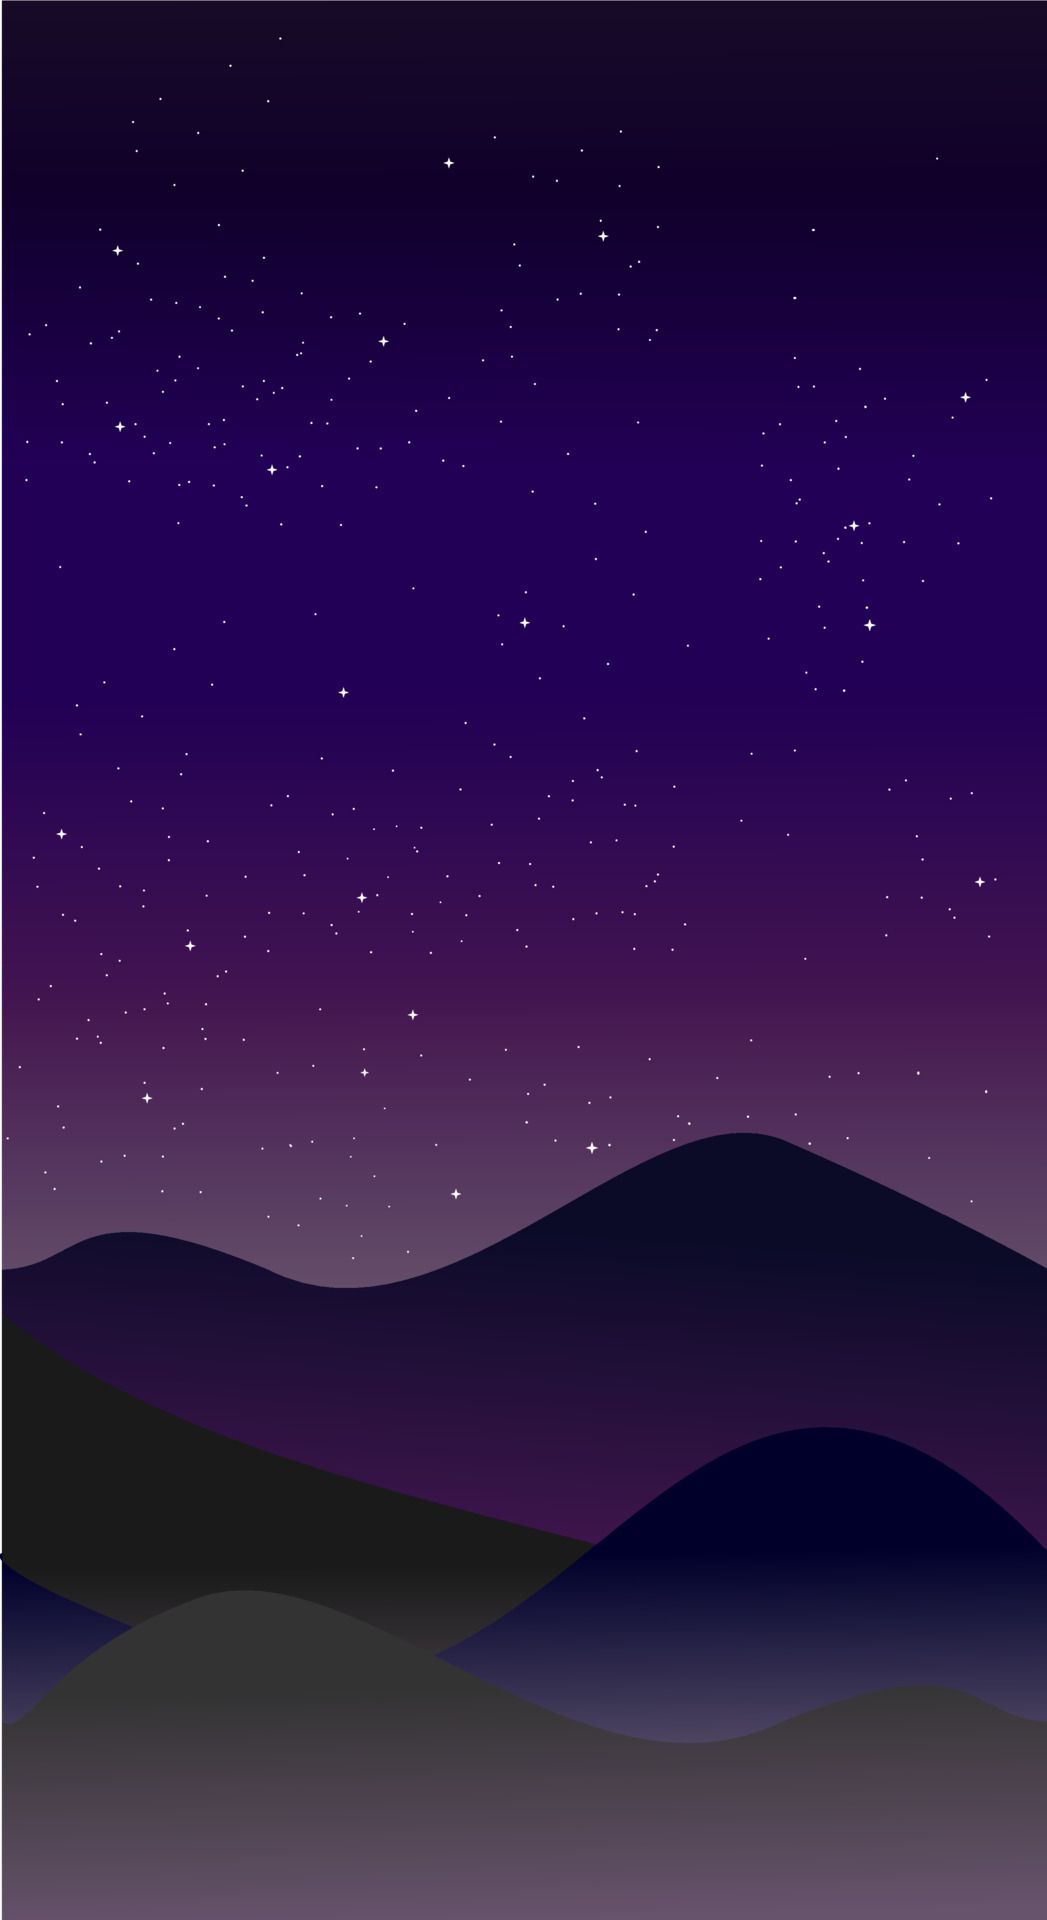 Mountain landscape illustration in flat style with design hill and smoke in night view. Aesthetic nature background. Banner for mobile phone screen saver theme, lock screen and wallpaper. Vector Art